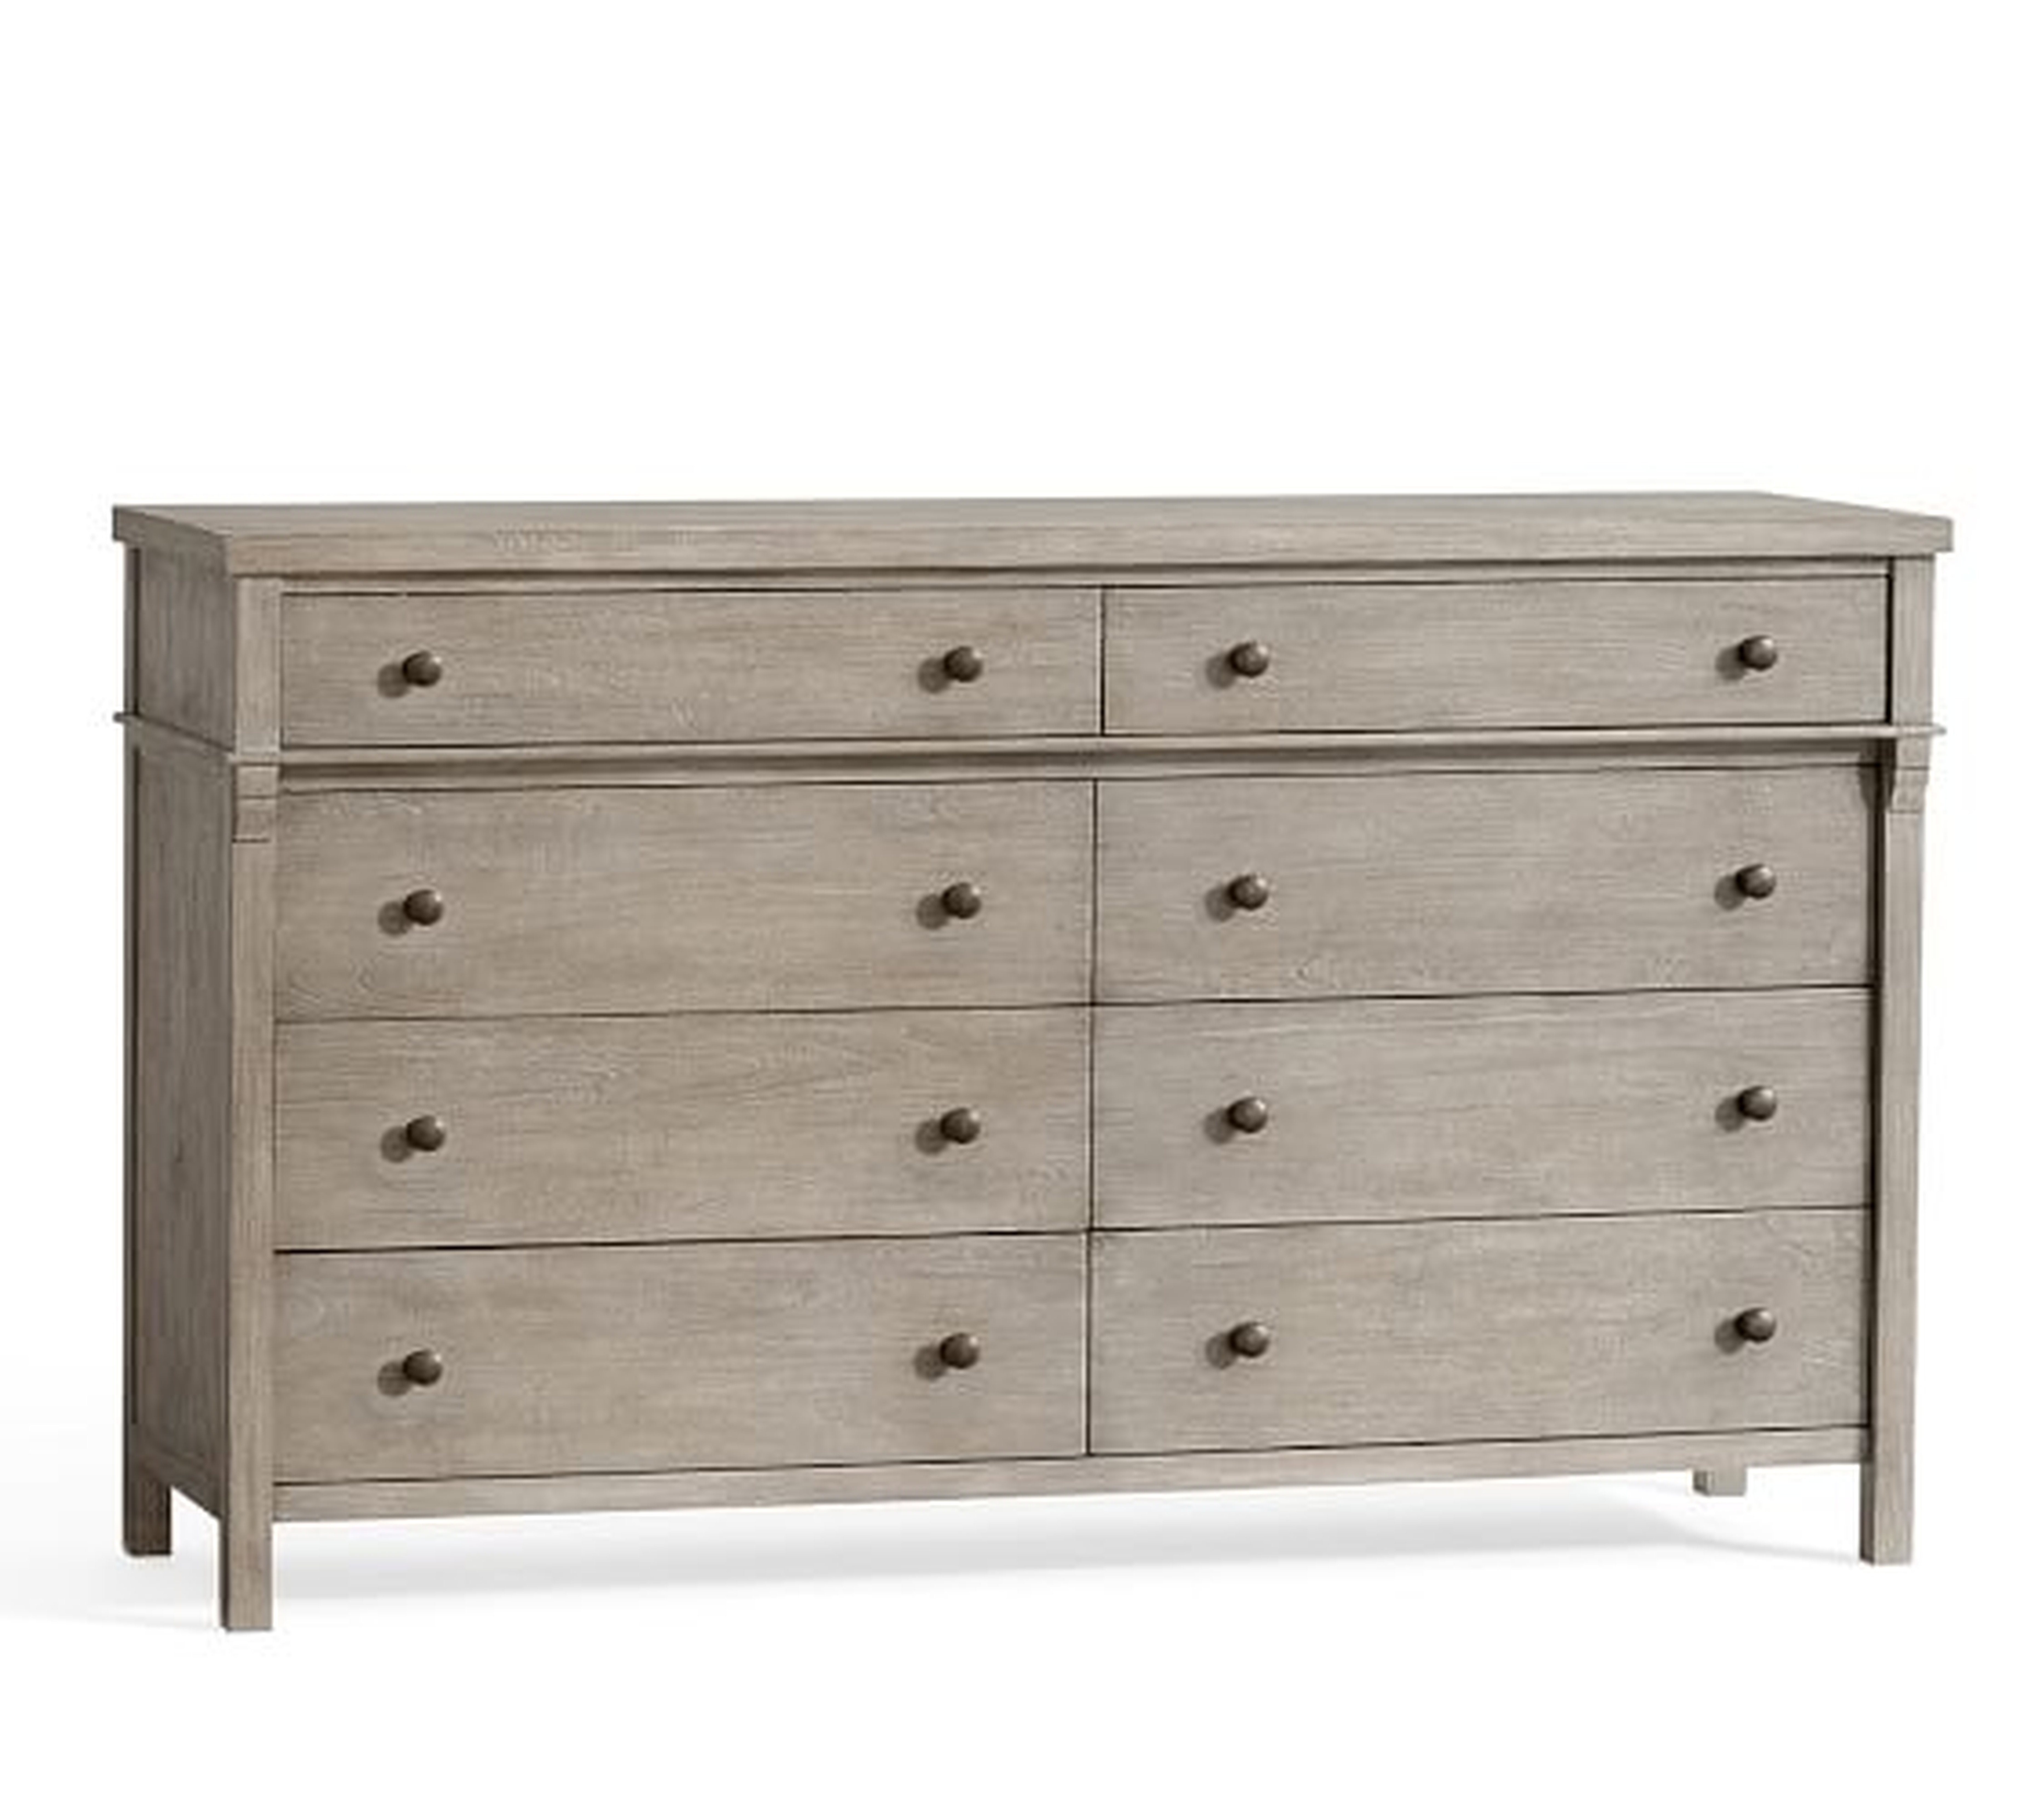 TOULOUSE EXTRA WIDE DRESSER - Pottery Barn